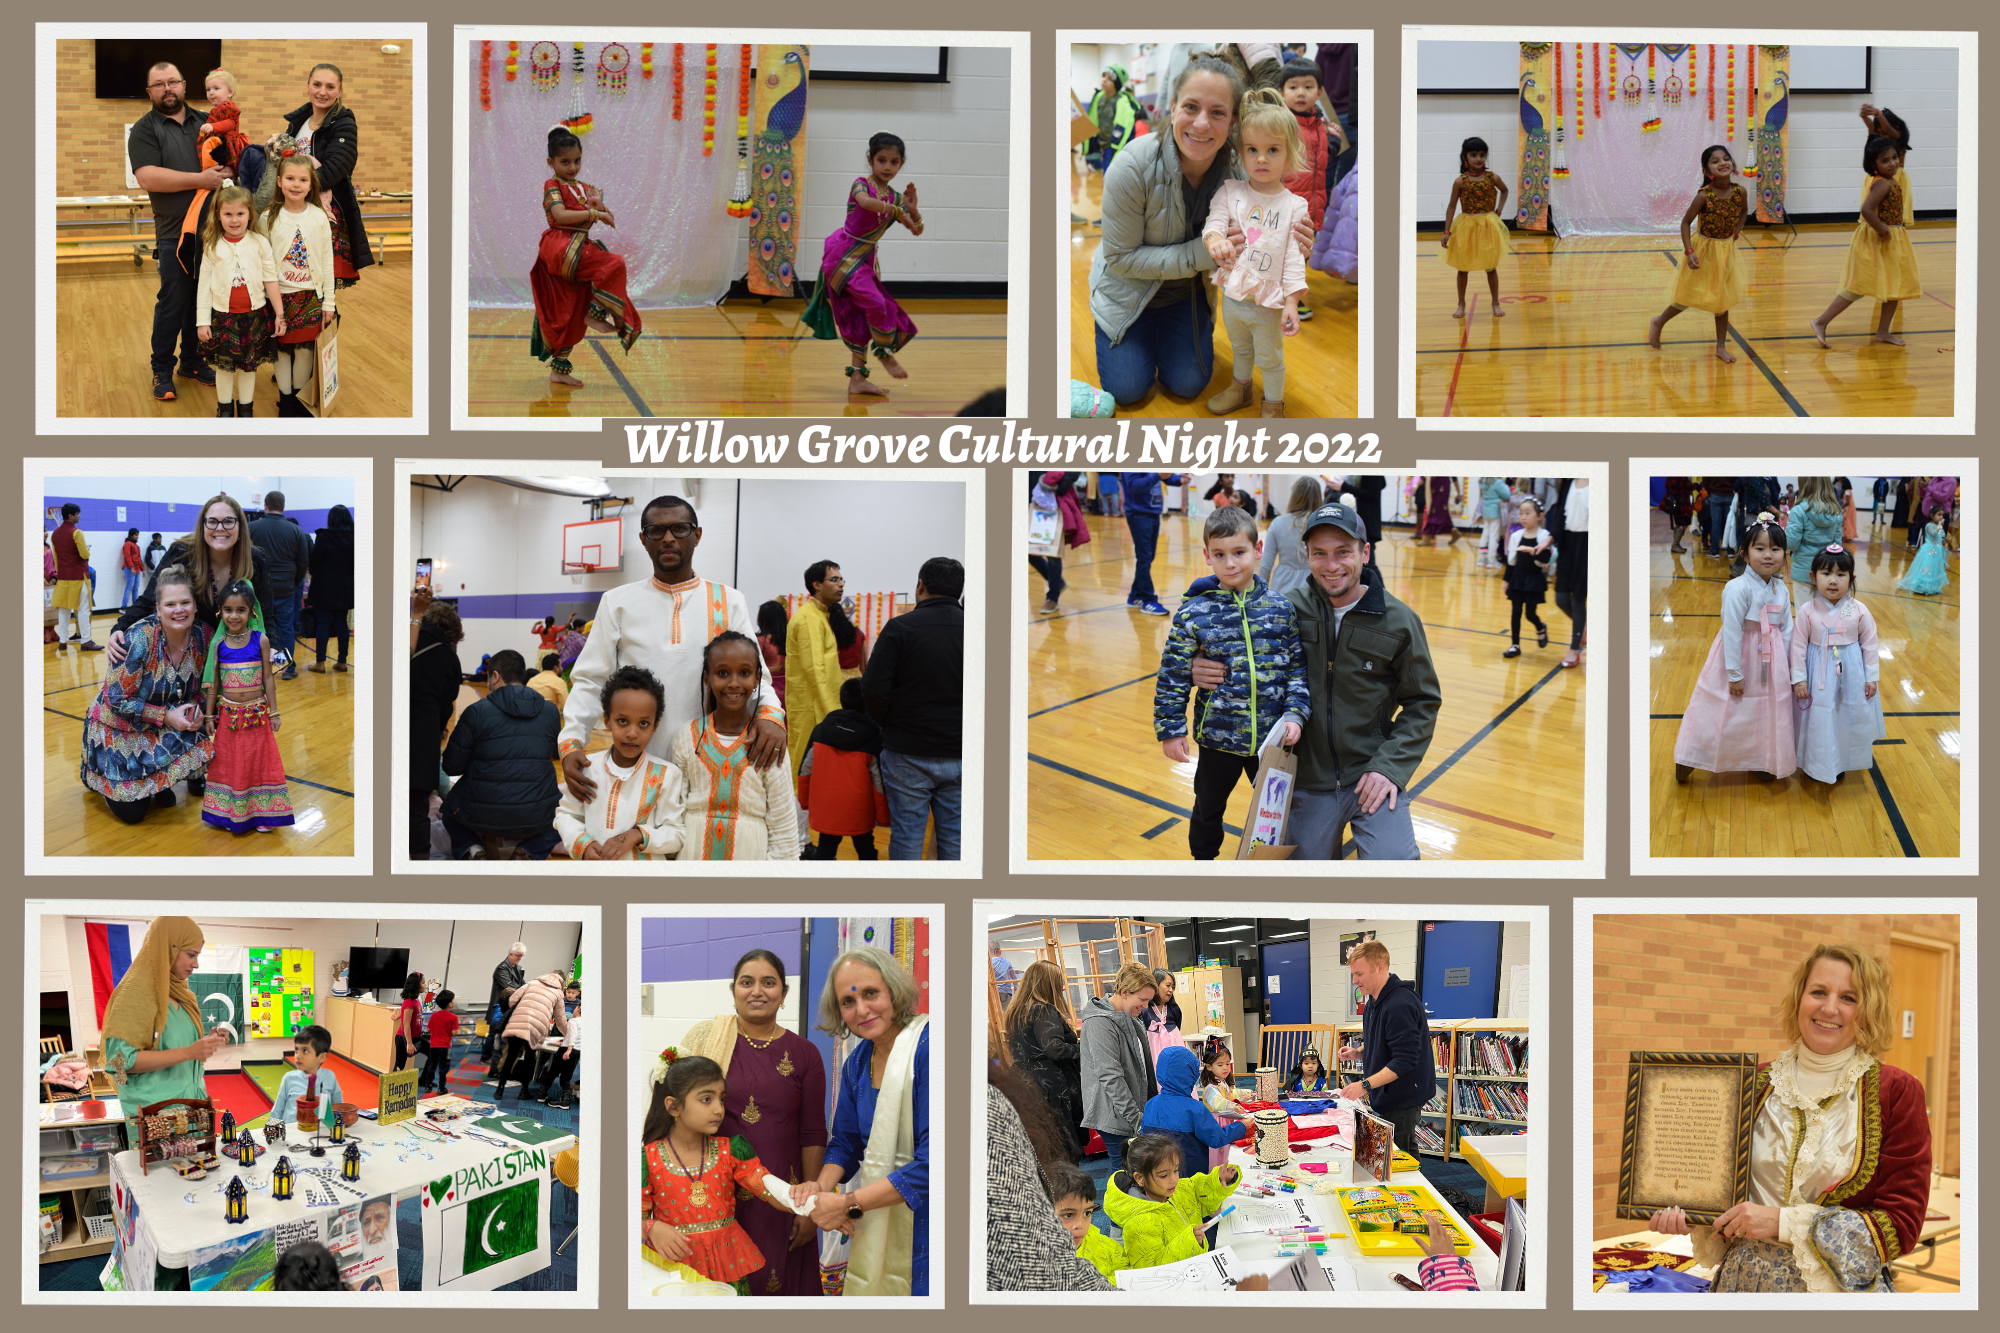 Willow Grove Early Learning Center Cultural Night 2022